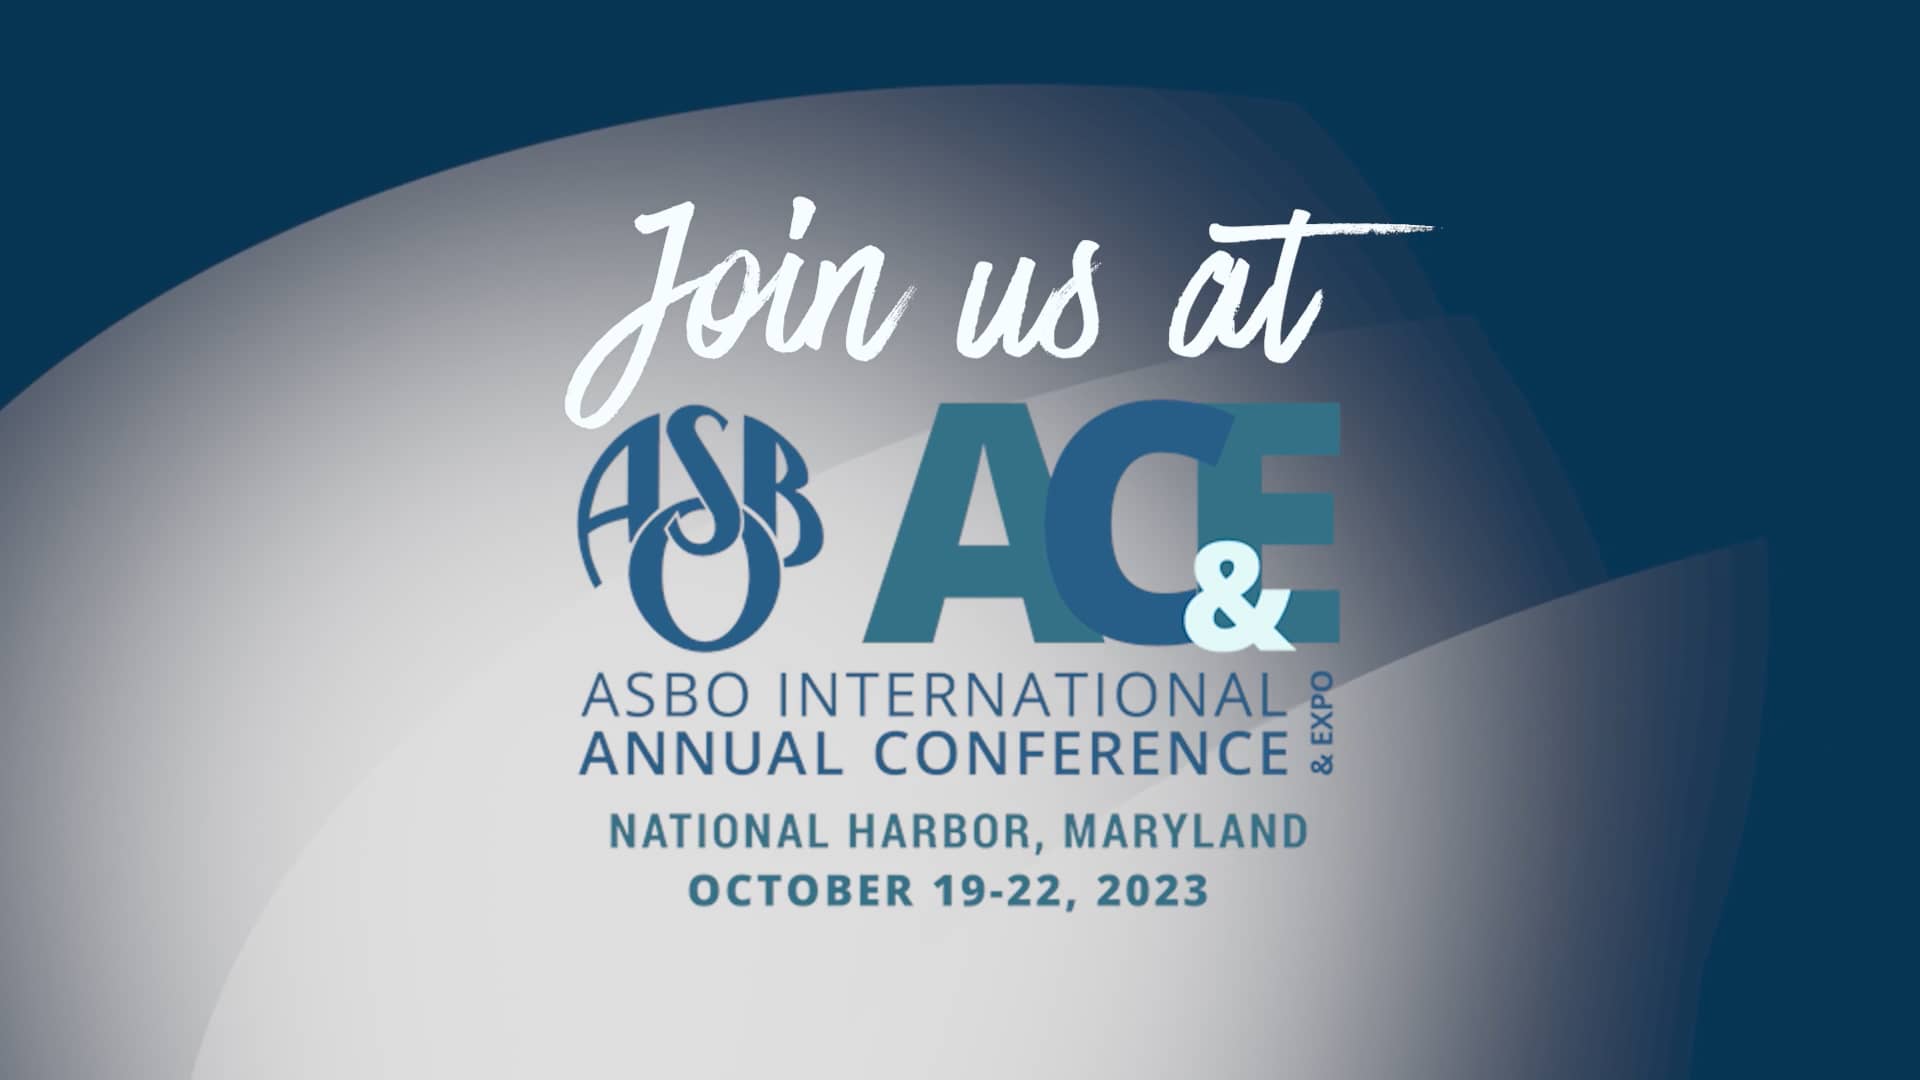 2023 ASBO International Annual Conference & Expo on Vimeo